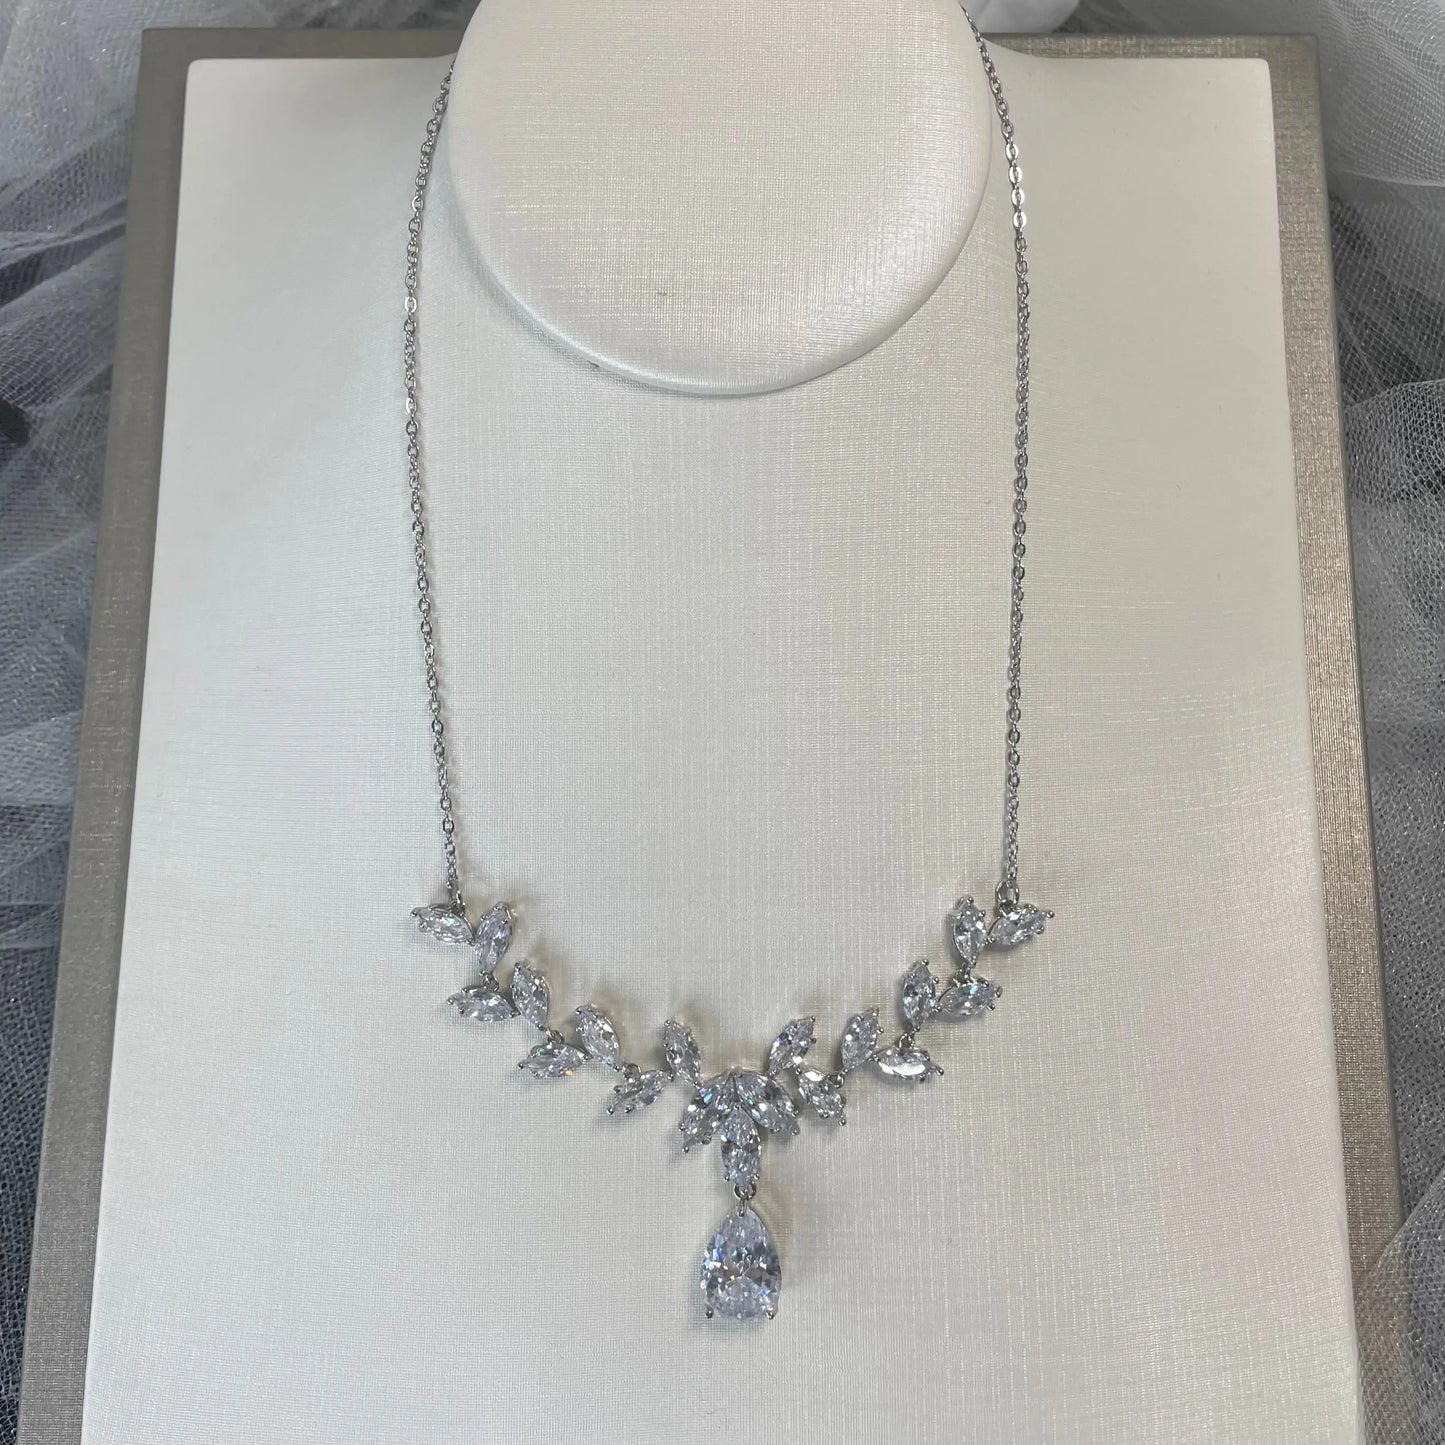 Silver Necklace: An elegant silver necklace with a delicate leaf design and a stunning diamante drop.